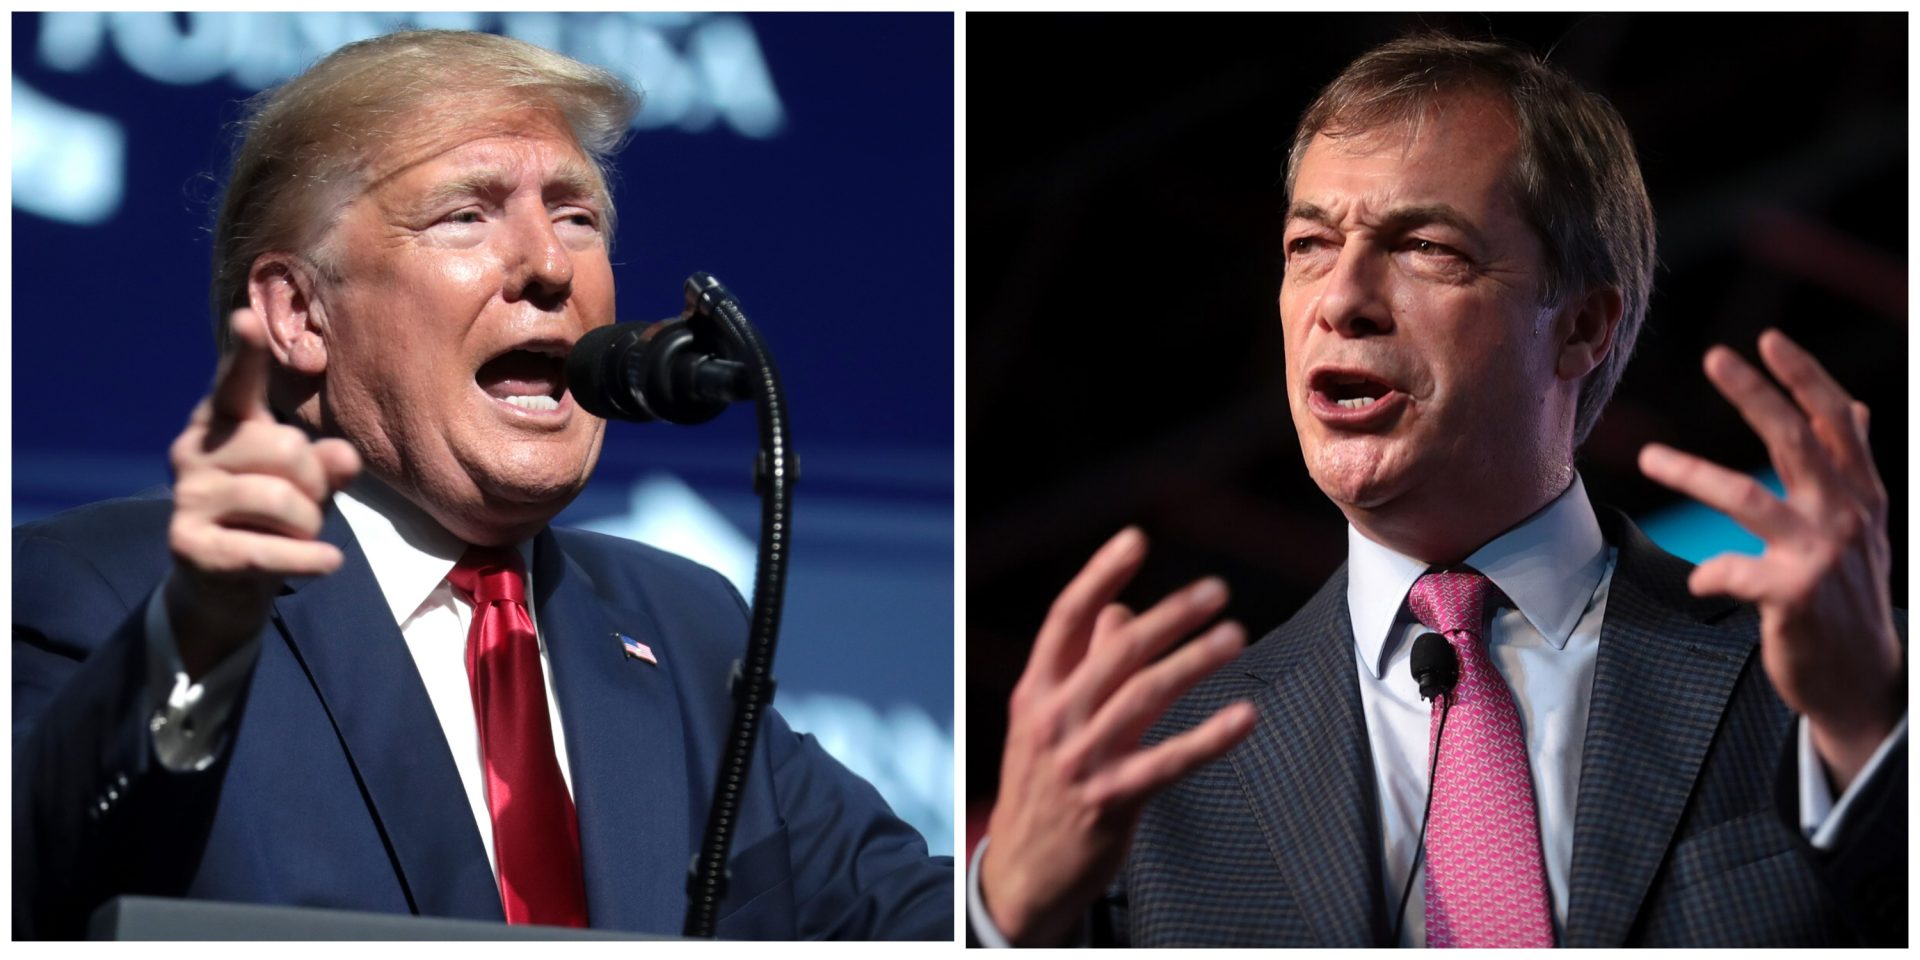 Britain’s Nigel Farage, right, and America’s Donald Trump 

Photographs courtesy of Wikimedia Commons, Gage Skidmore